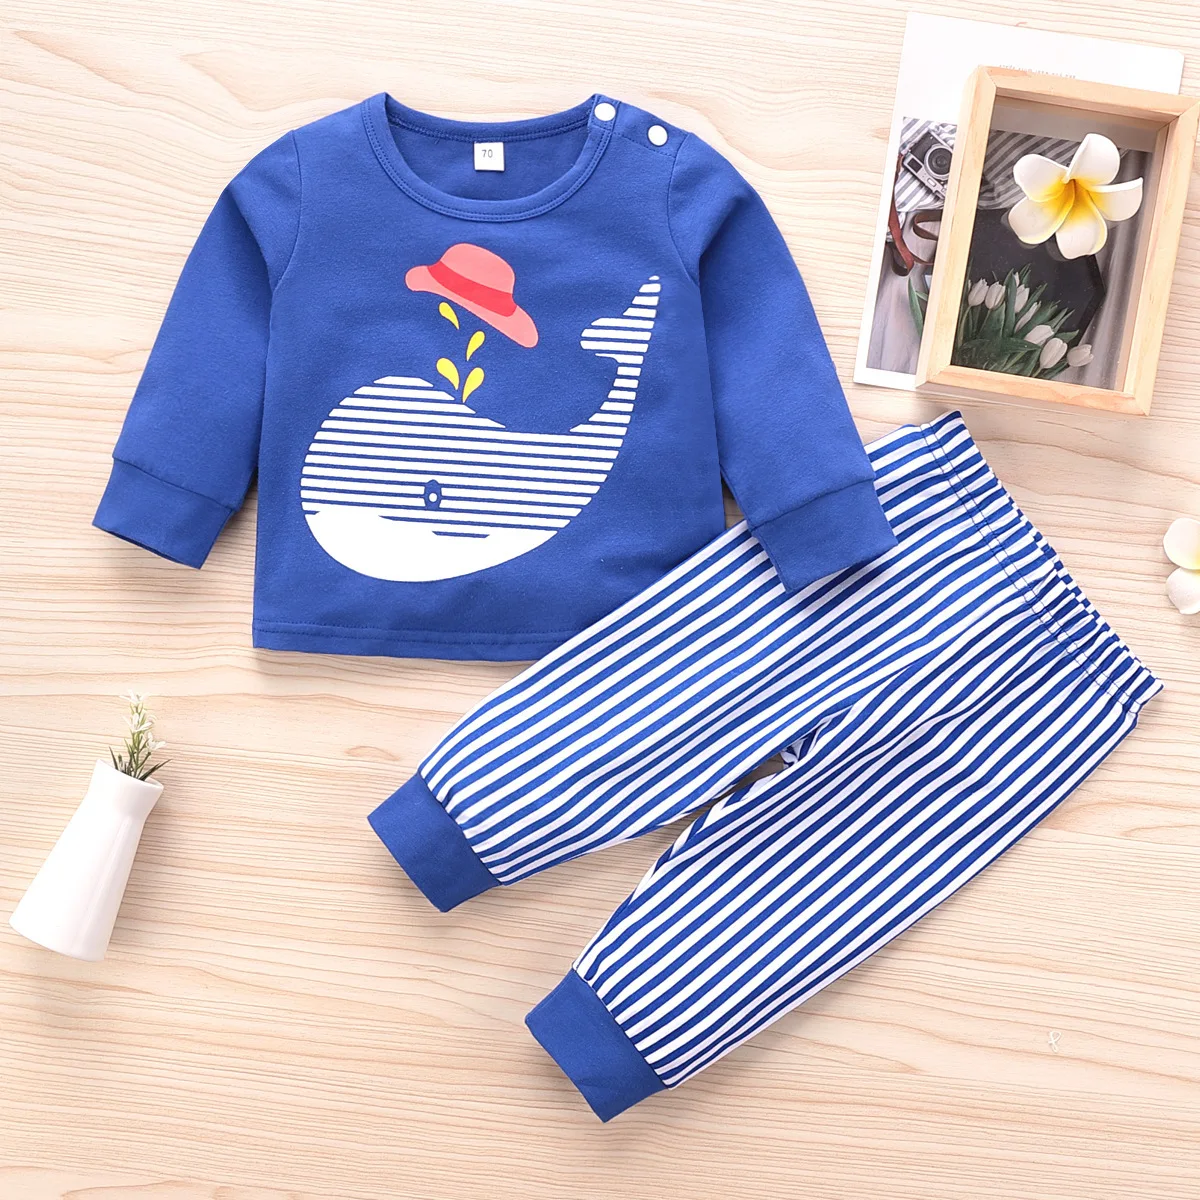 

Fall Winter Newborn Baby Girl Clothes Set 2 Piece Striped Whale Long Sleeve Sweater Tops+striped Trousers Baby Boy Outfit 0-18M